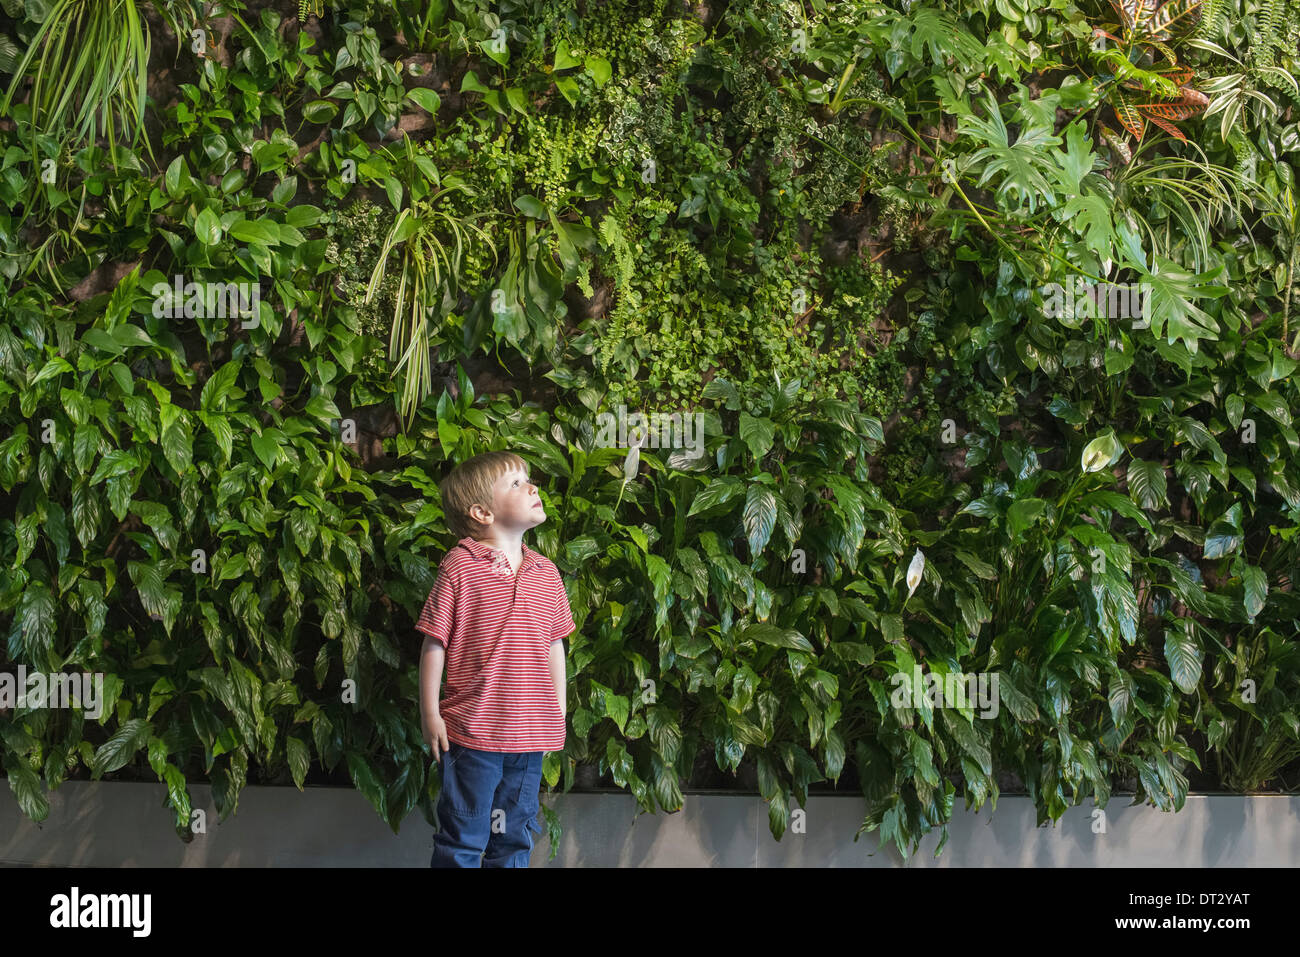 city in spring An urban lifestyle A young boy looking up at a wall covered with lush foliage ferns and bright green leaves Stock Photo